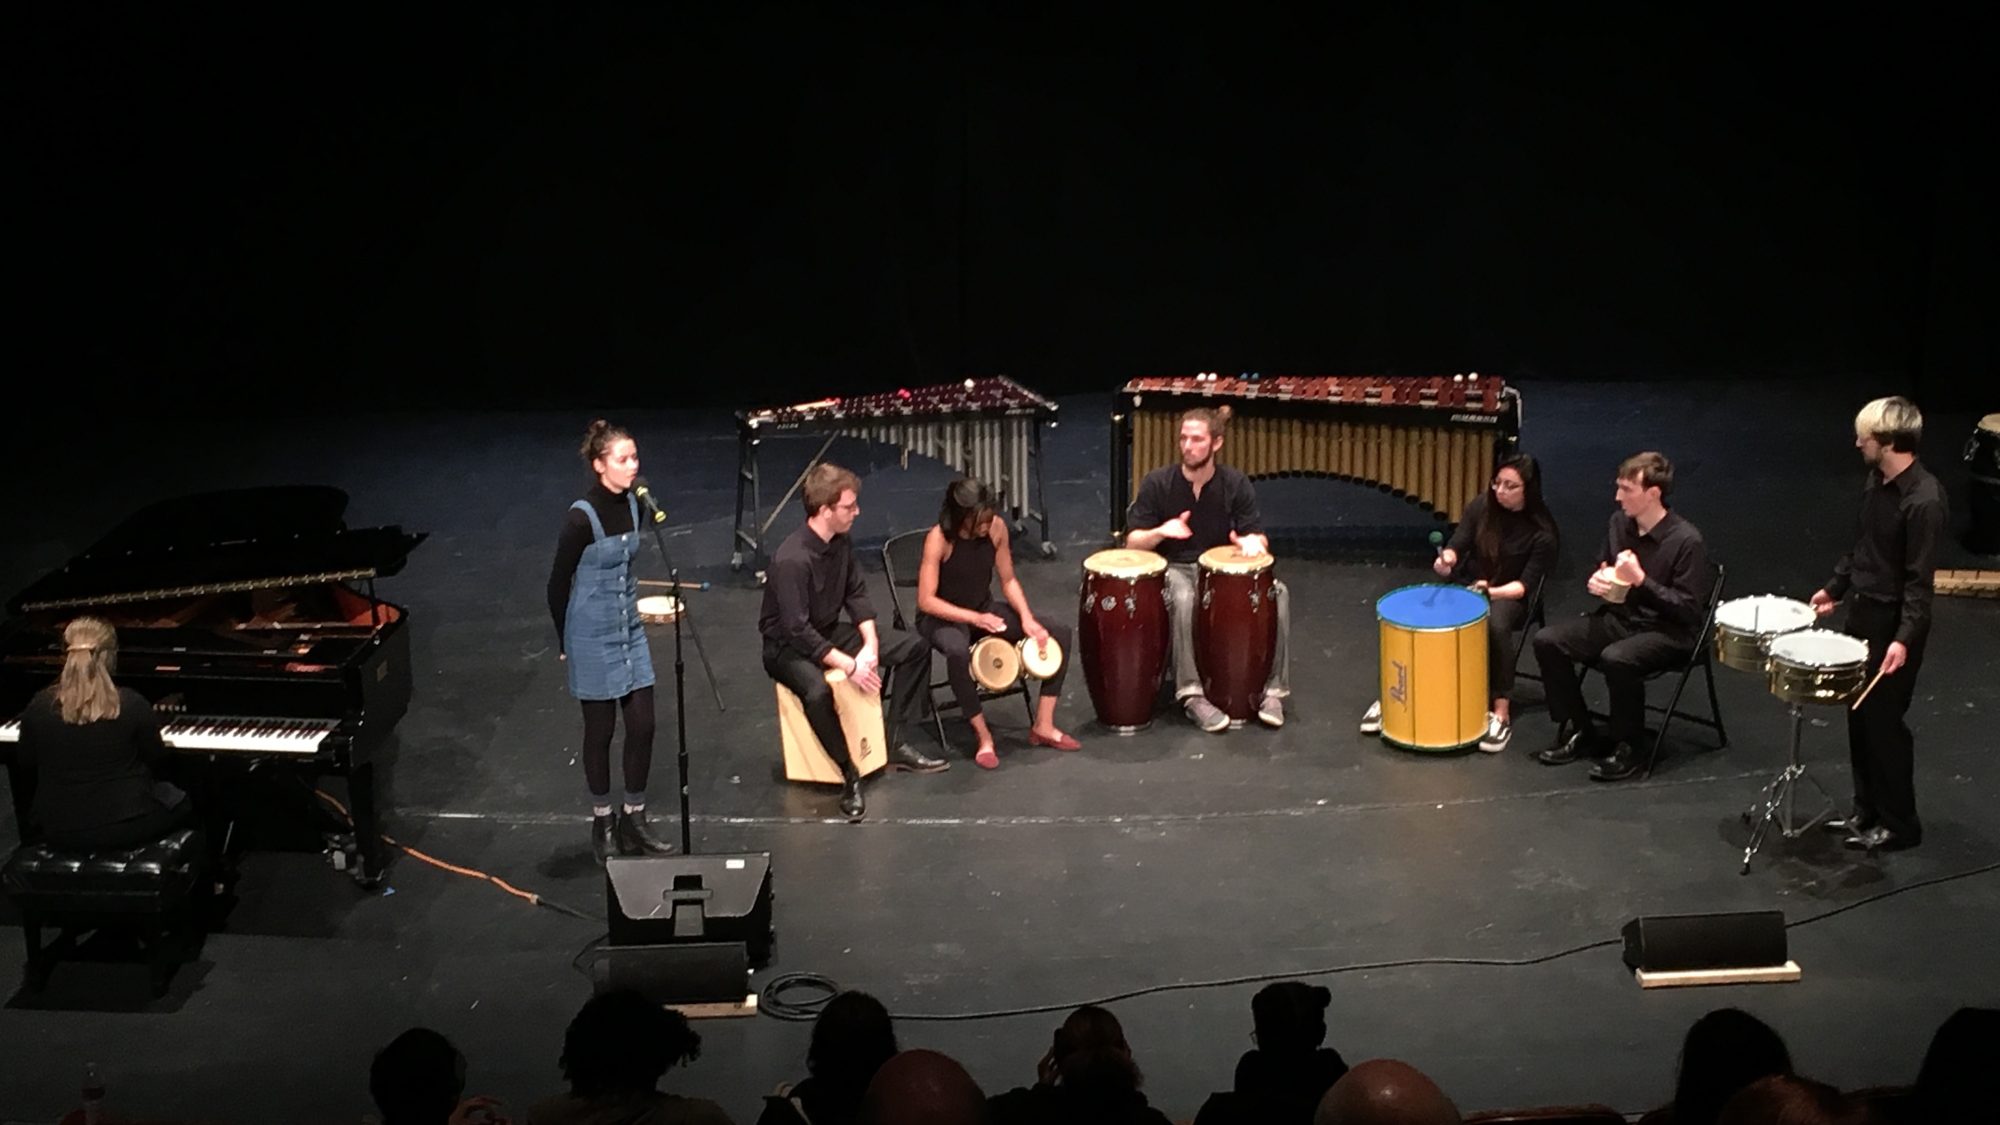 Members of the World Percussion Ensemble perform in front of a silhouetted audience in the Davis Performing Arts Center.